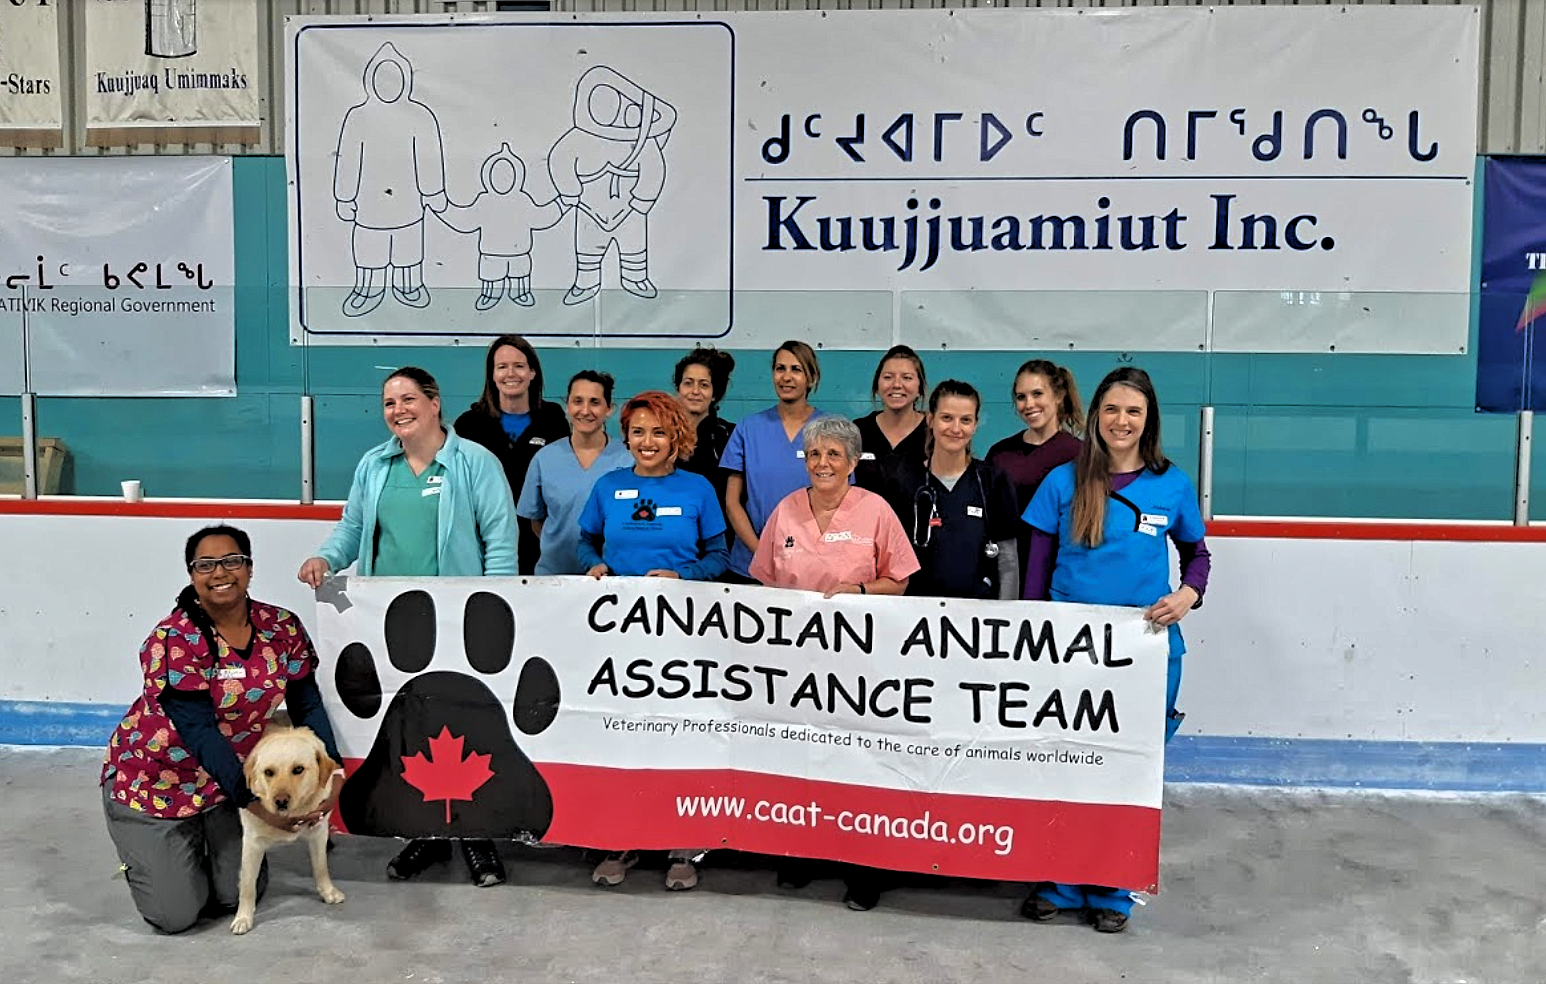 Canadian Animal Assistance Team